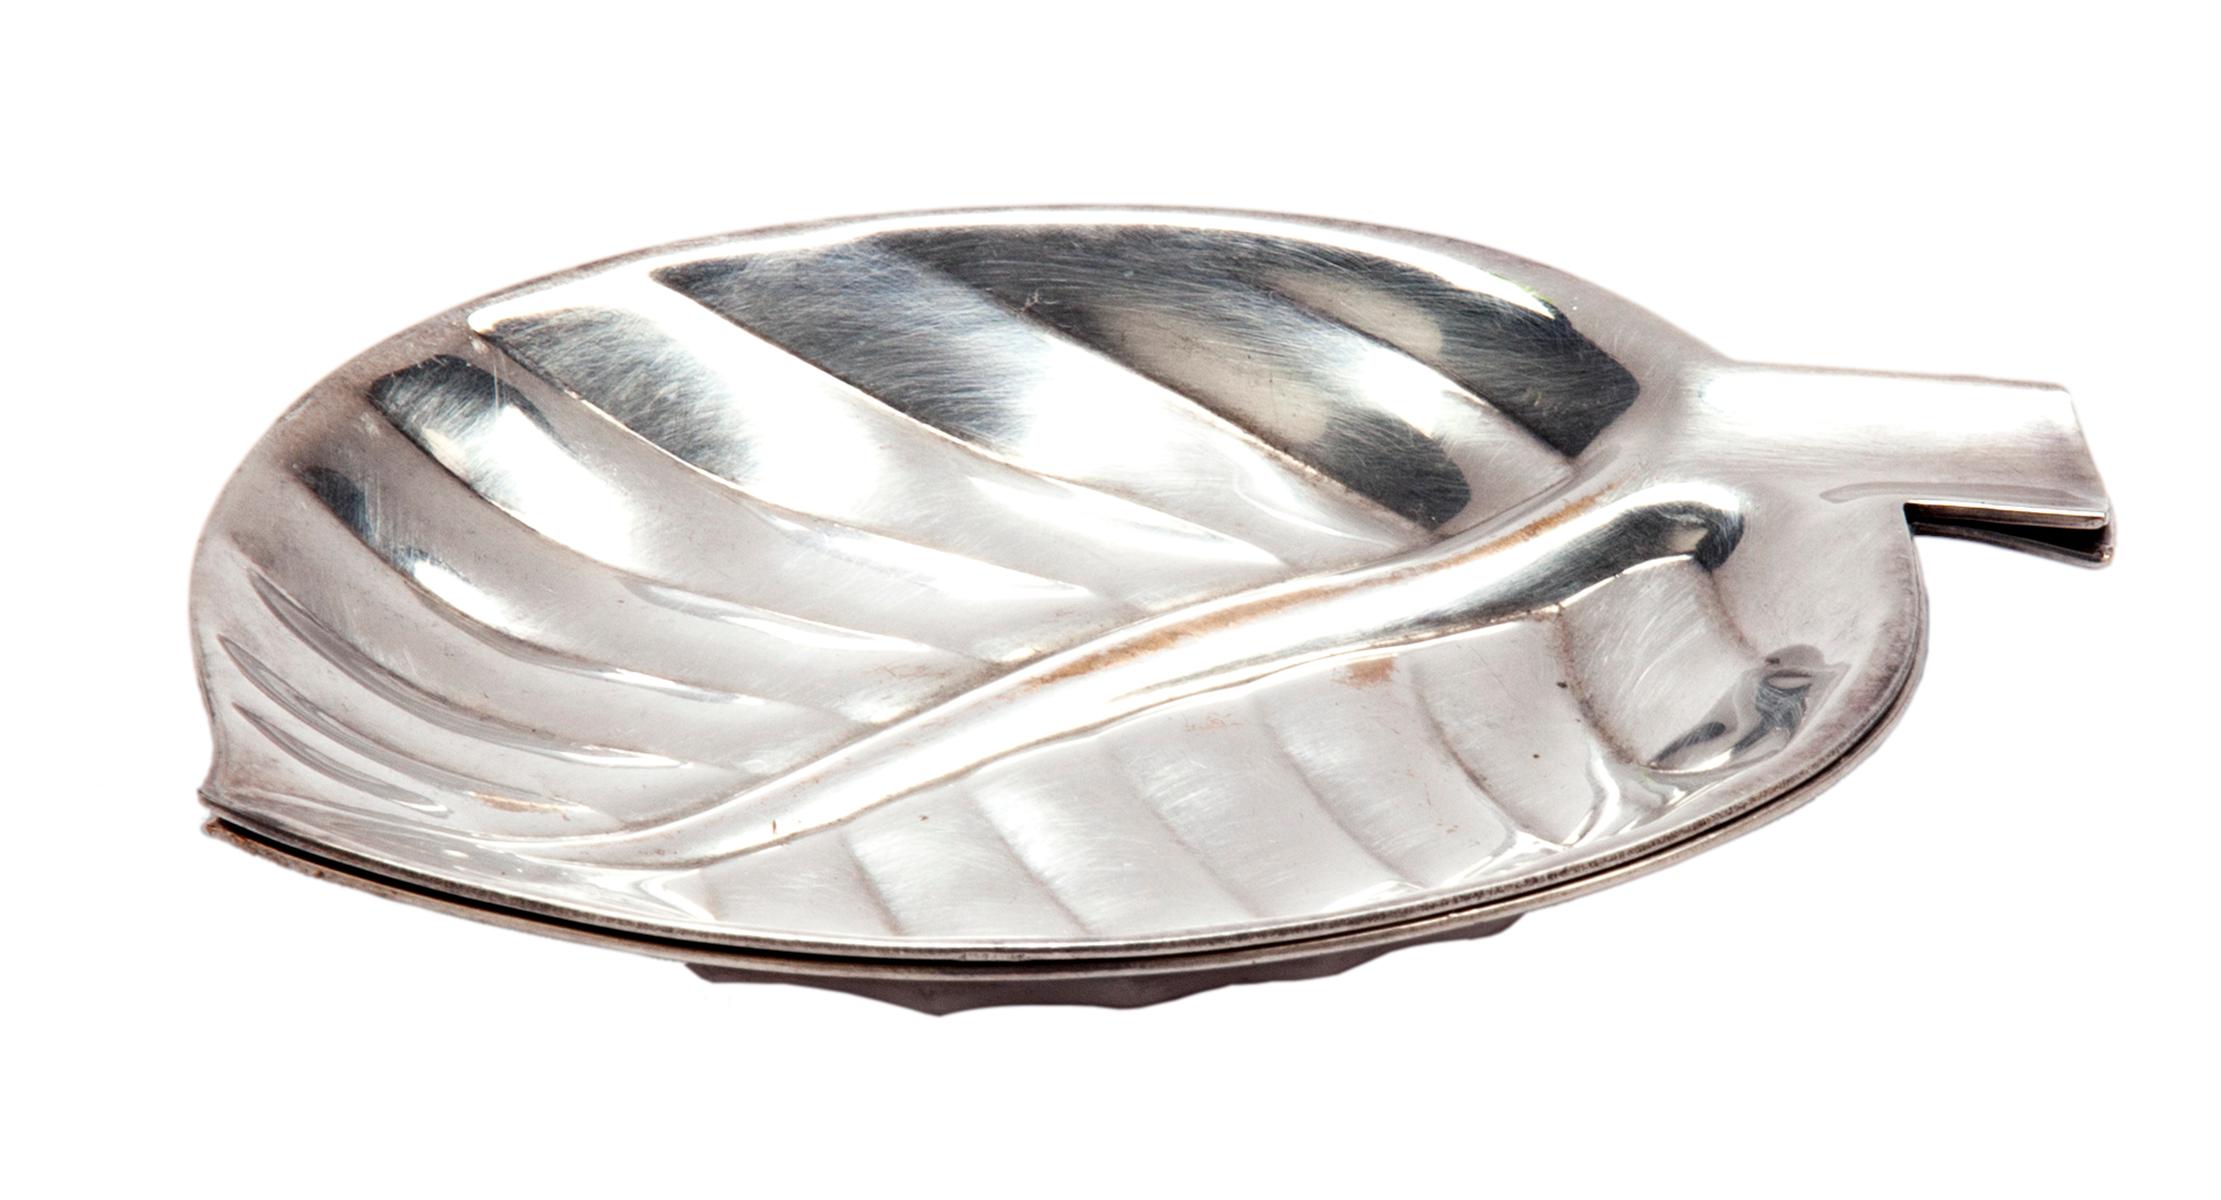 Mid Century Silver plate leaf trays, hallmark by International Silver on the underside. There is a peek of smooth brass peeking through the silver finish on 1 of the trays. By International Silver.